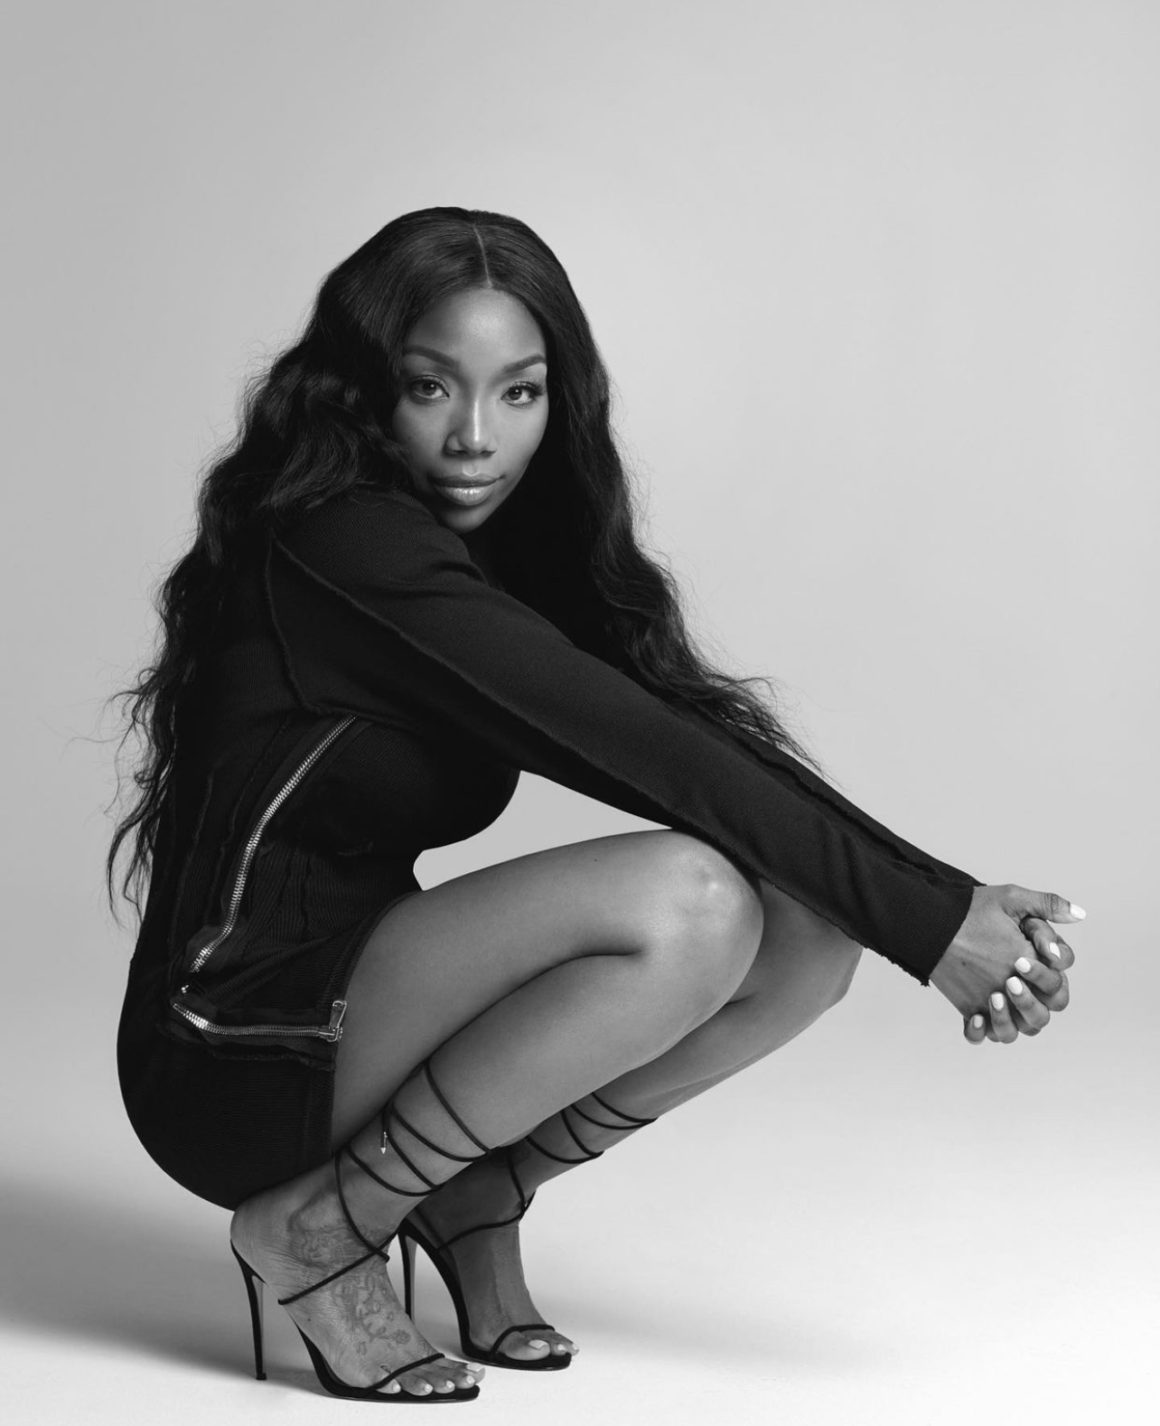 Brandy Stuns in Black and White Photoshoot Wearing Lionne Clothing Black Long Sleeve Zip Up Mini Dress and Femme LA Black Lace Up Sandals6